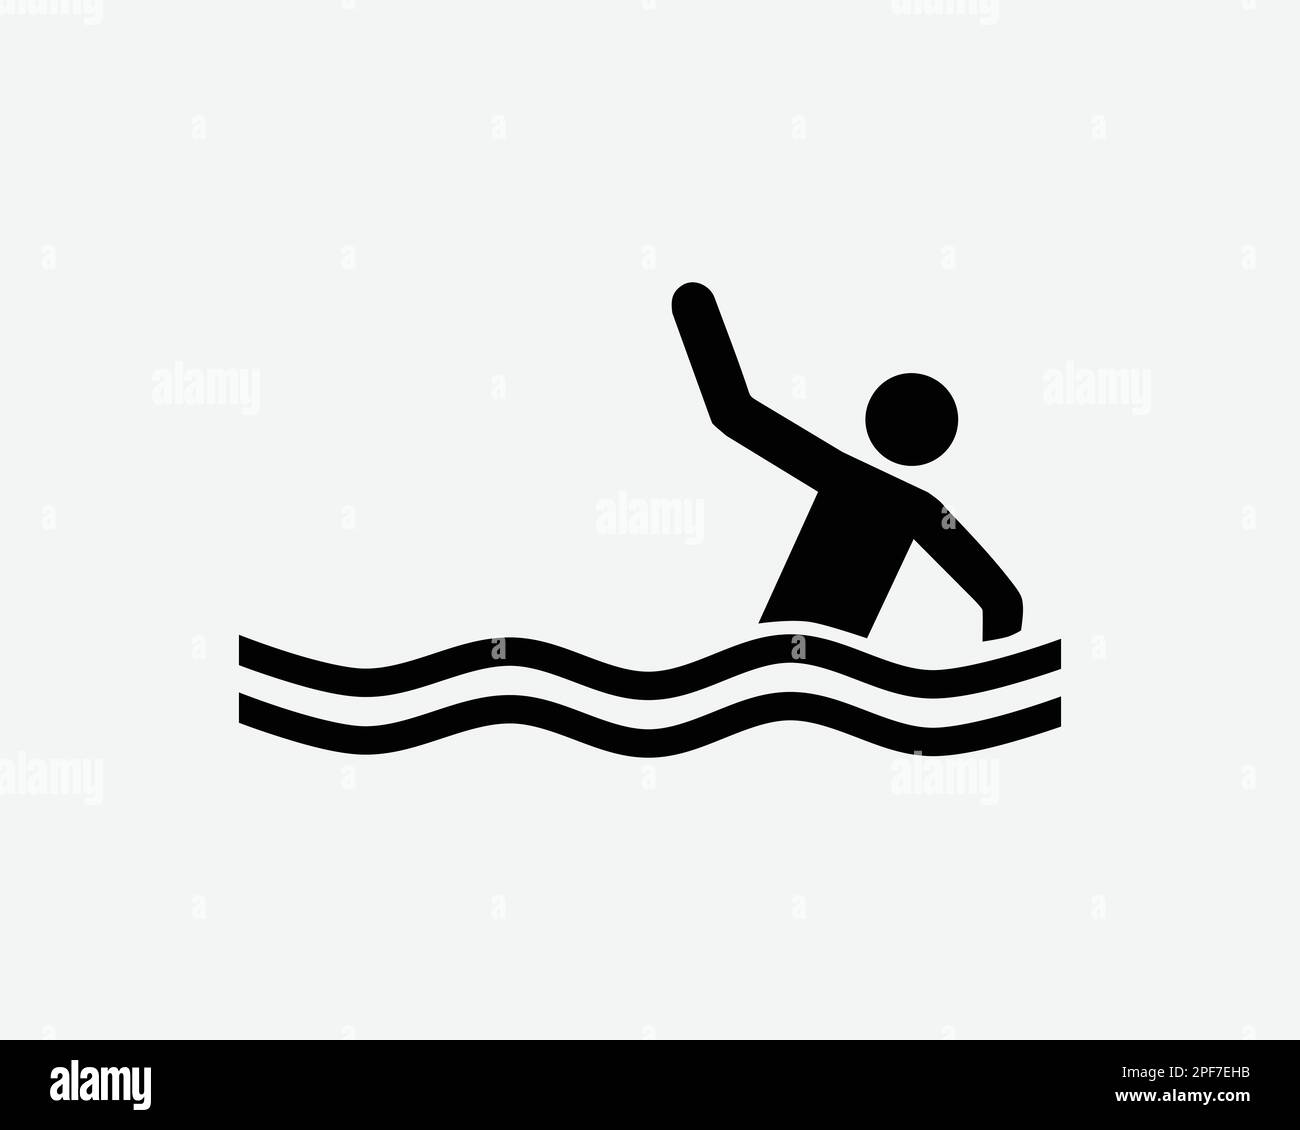 Drowning Drown Calling For Help Water Sea Ocean Rescue Black White Silhouette Sign Symbol Icon Clipart Graphic Artwork Pictogram Illustration Vector Stock Vector